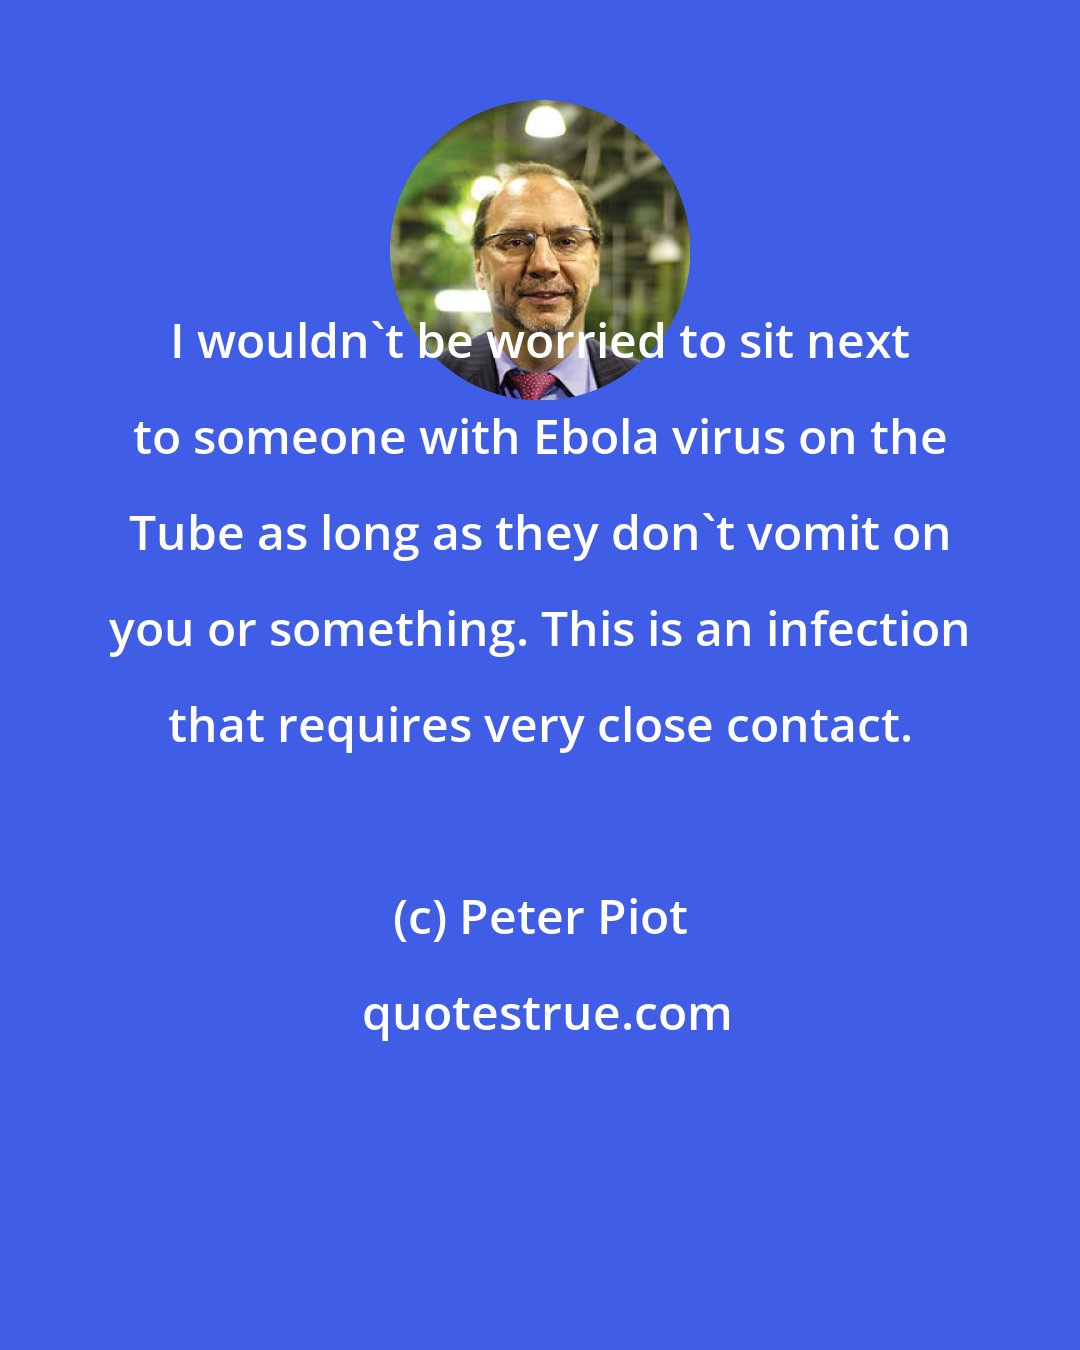 Peter Piot: I wouldn't be worried to sit next to someone with Ebola virus on the Tube as long as they don't vomit on you or something. This is an infection that requires very close contact.